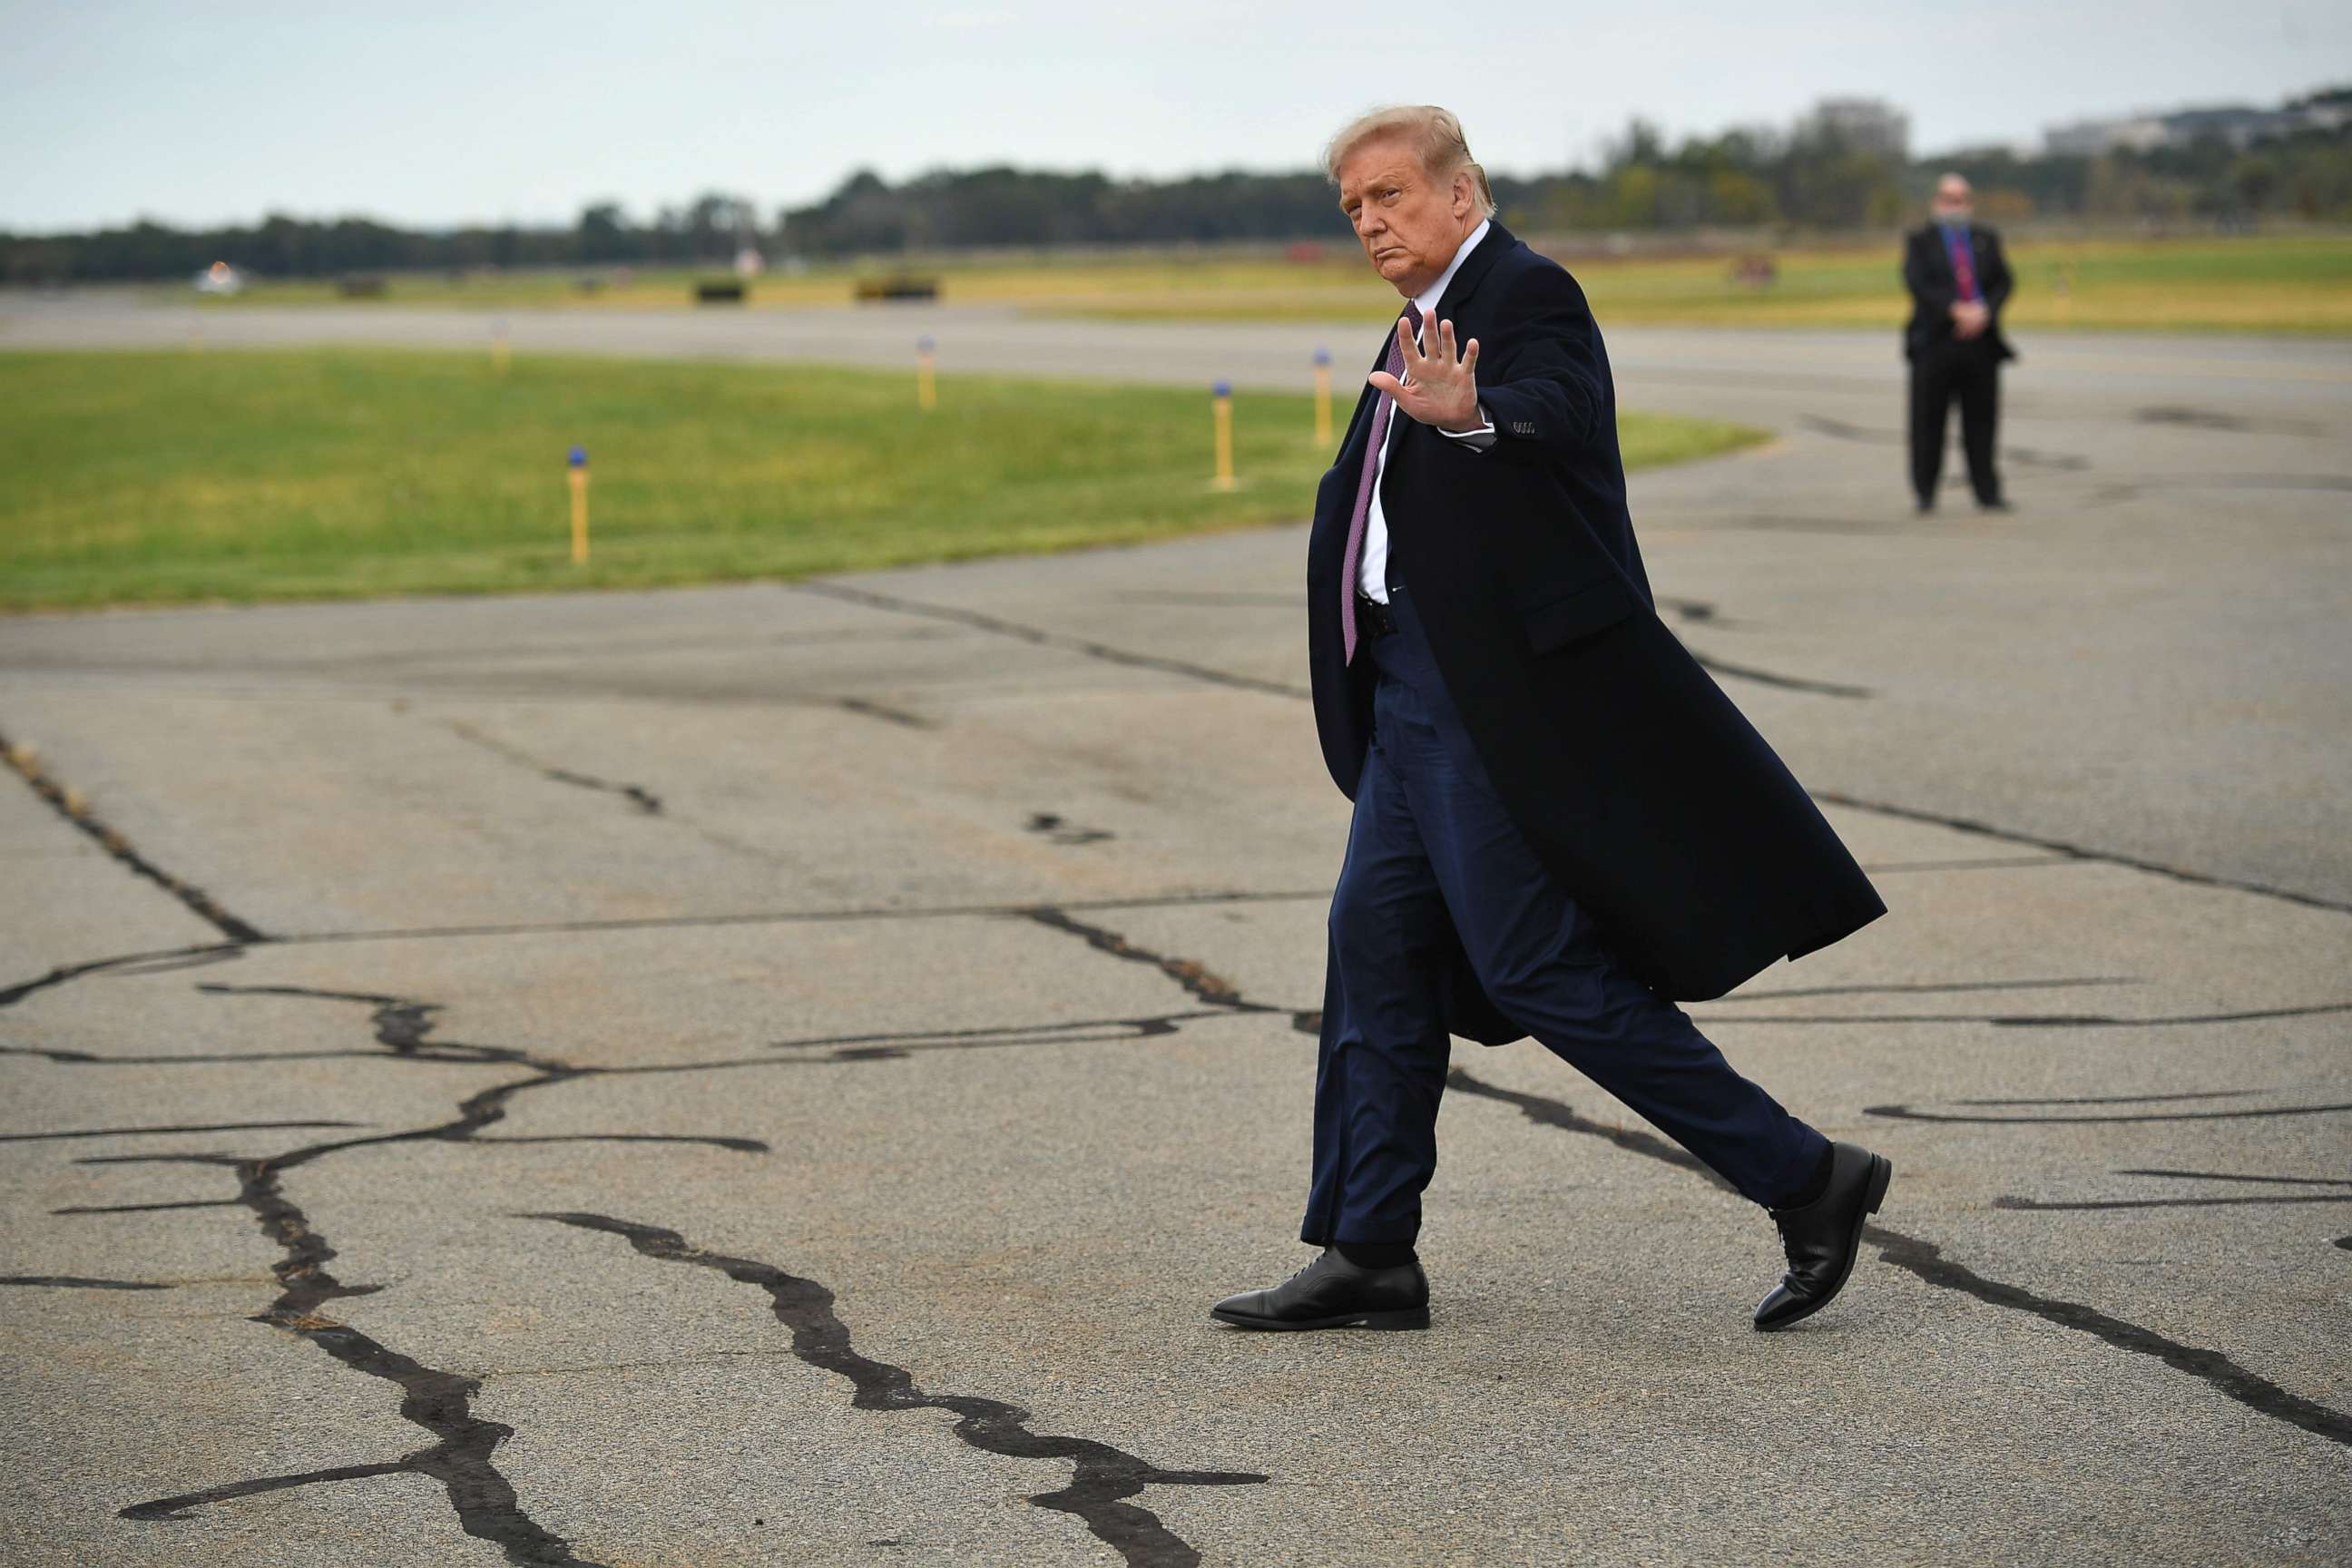 PHOTO: President Donald Trump steps off Air Force One upon arrival at Morristown Municipal Airport in Morristown, N.J., en route to Bedminster, N.J., on Oct. 1, 2020, for a fundraiser.